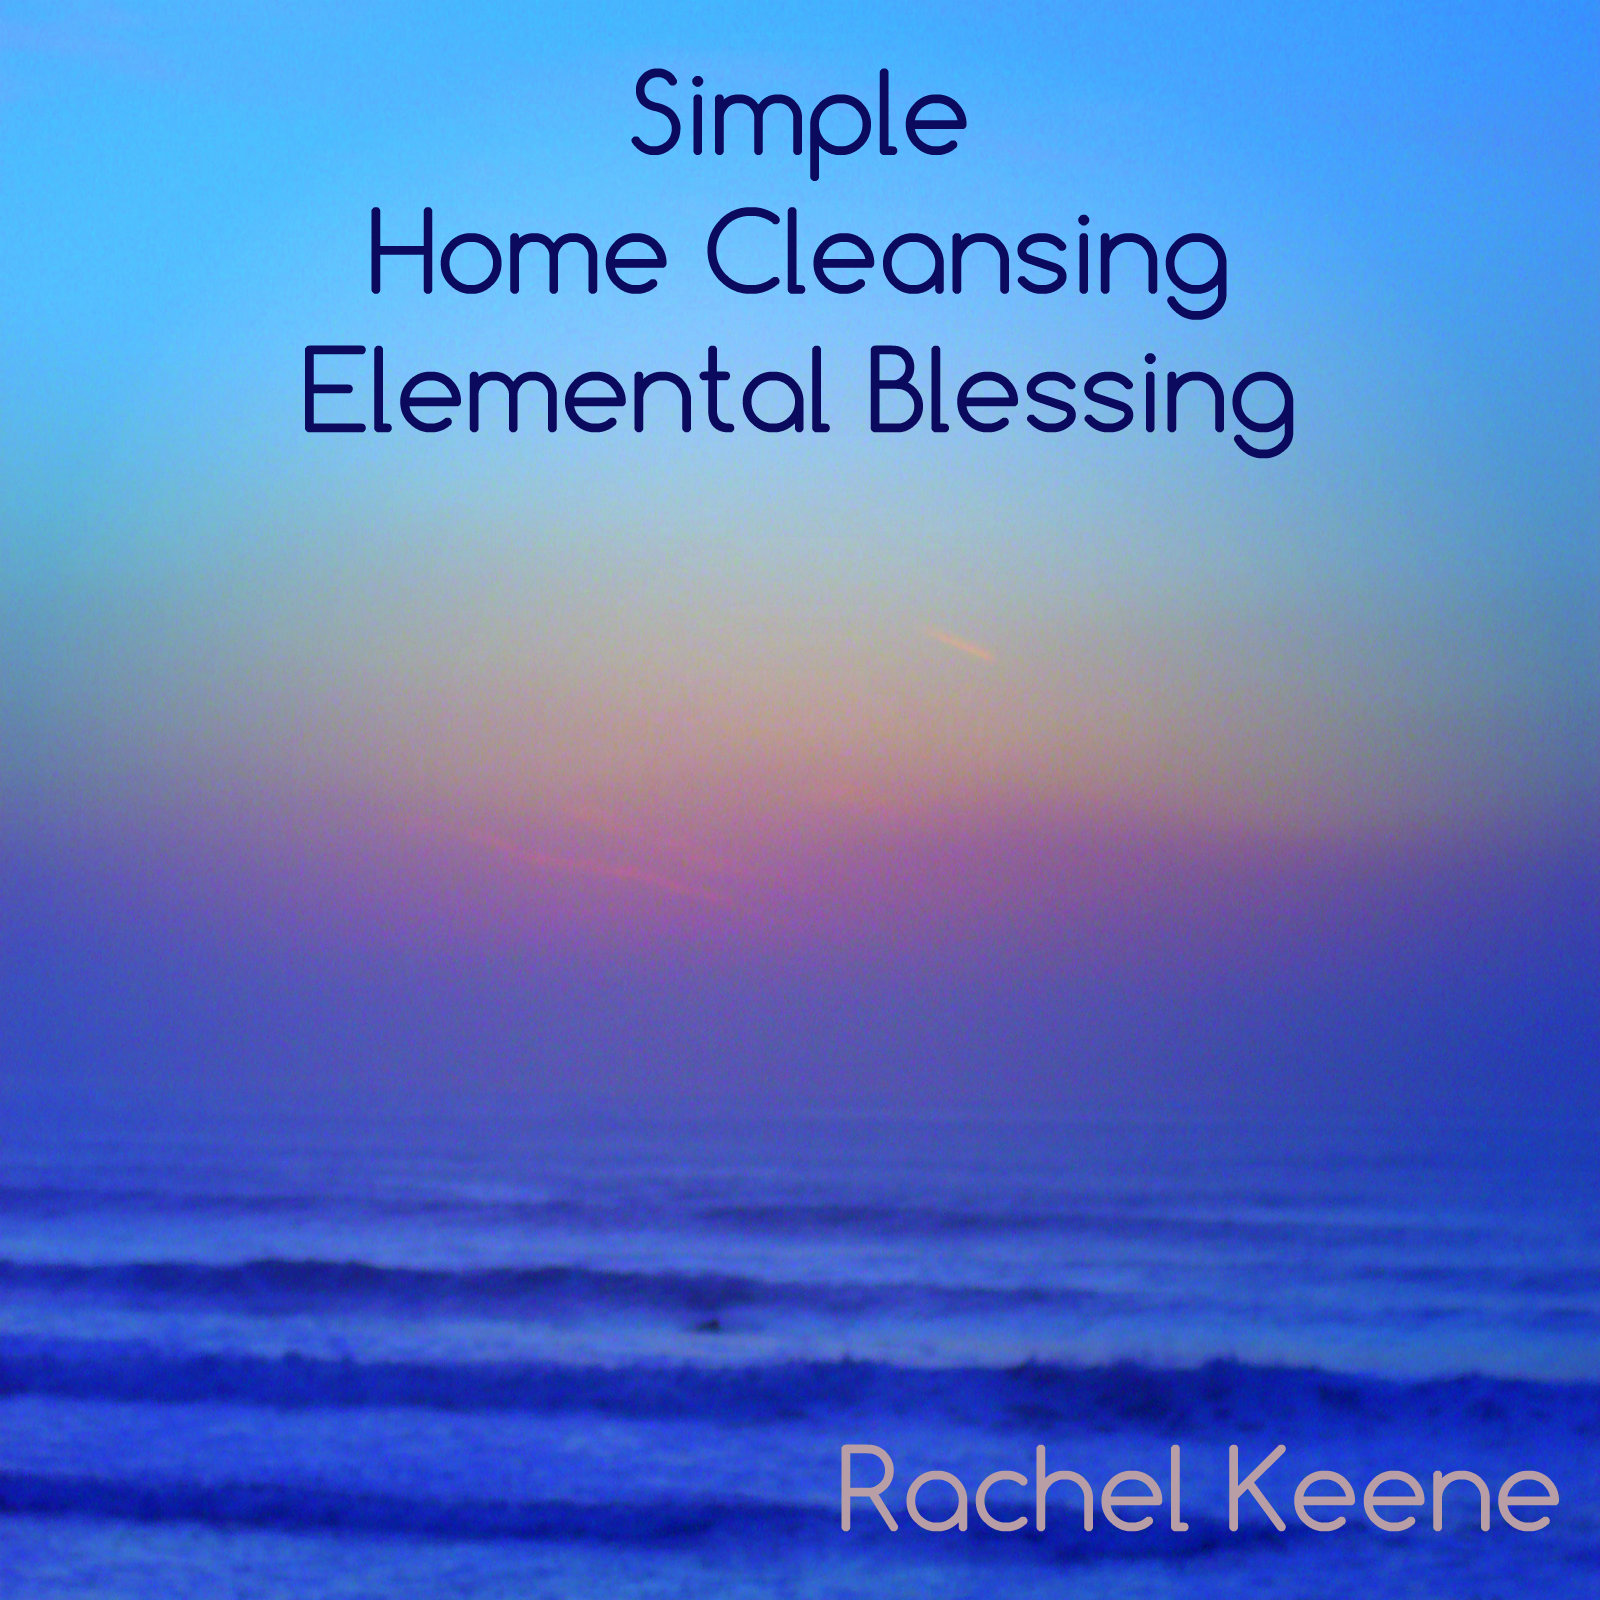 Simple Home Cleansing Elemental Blessing